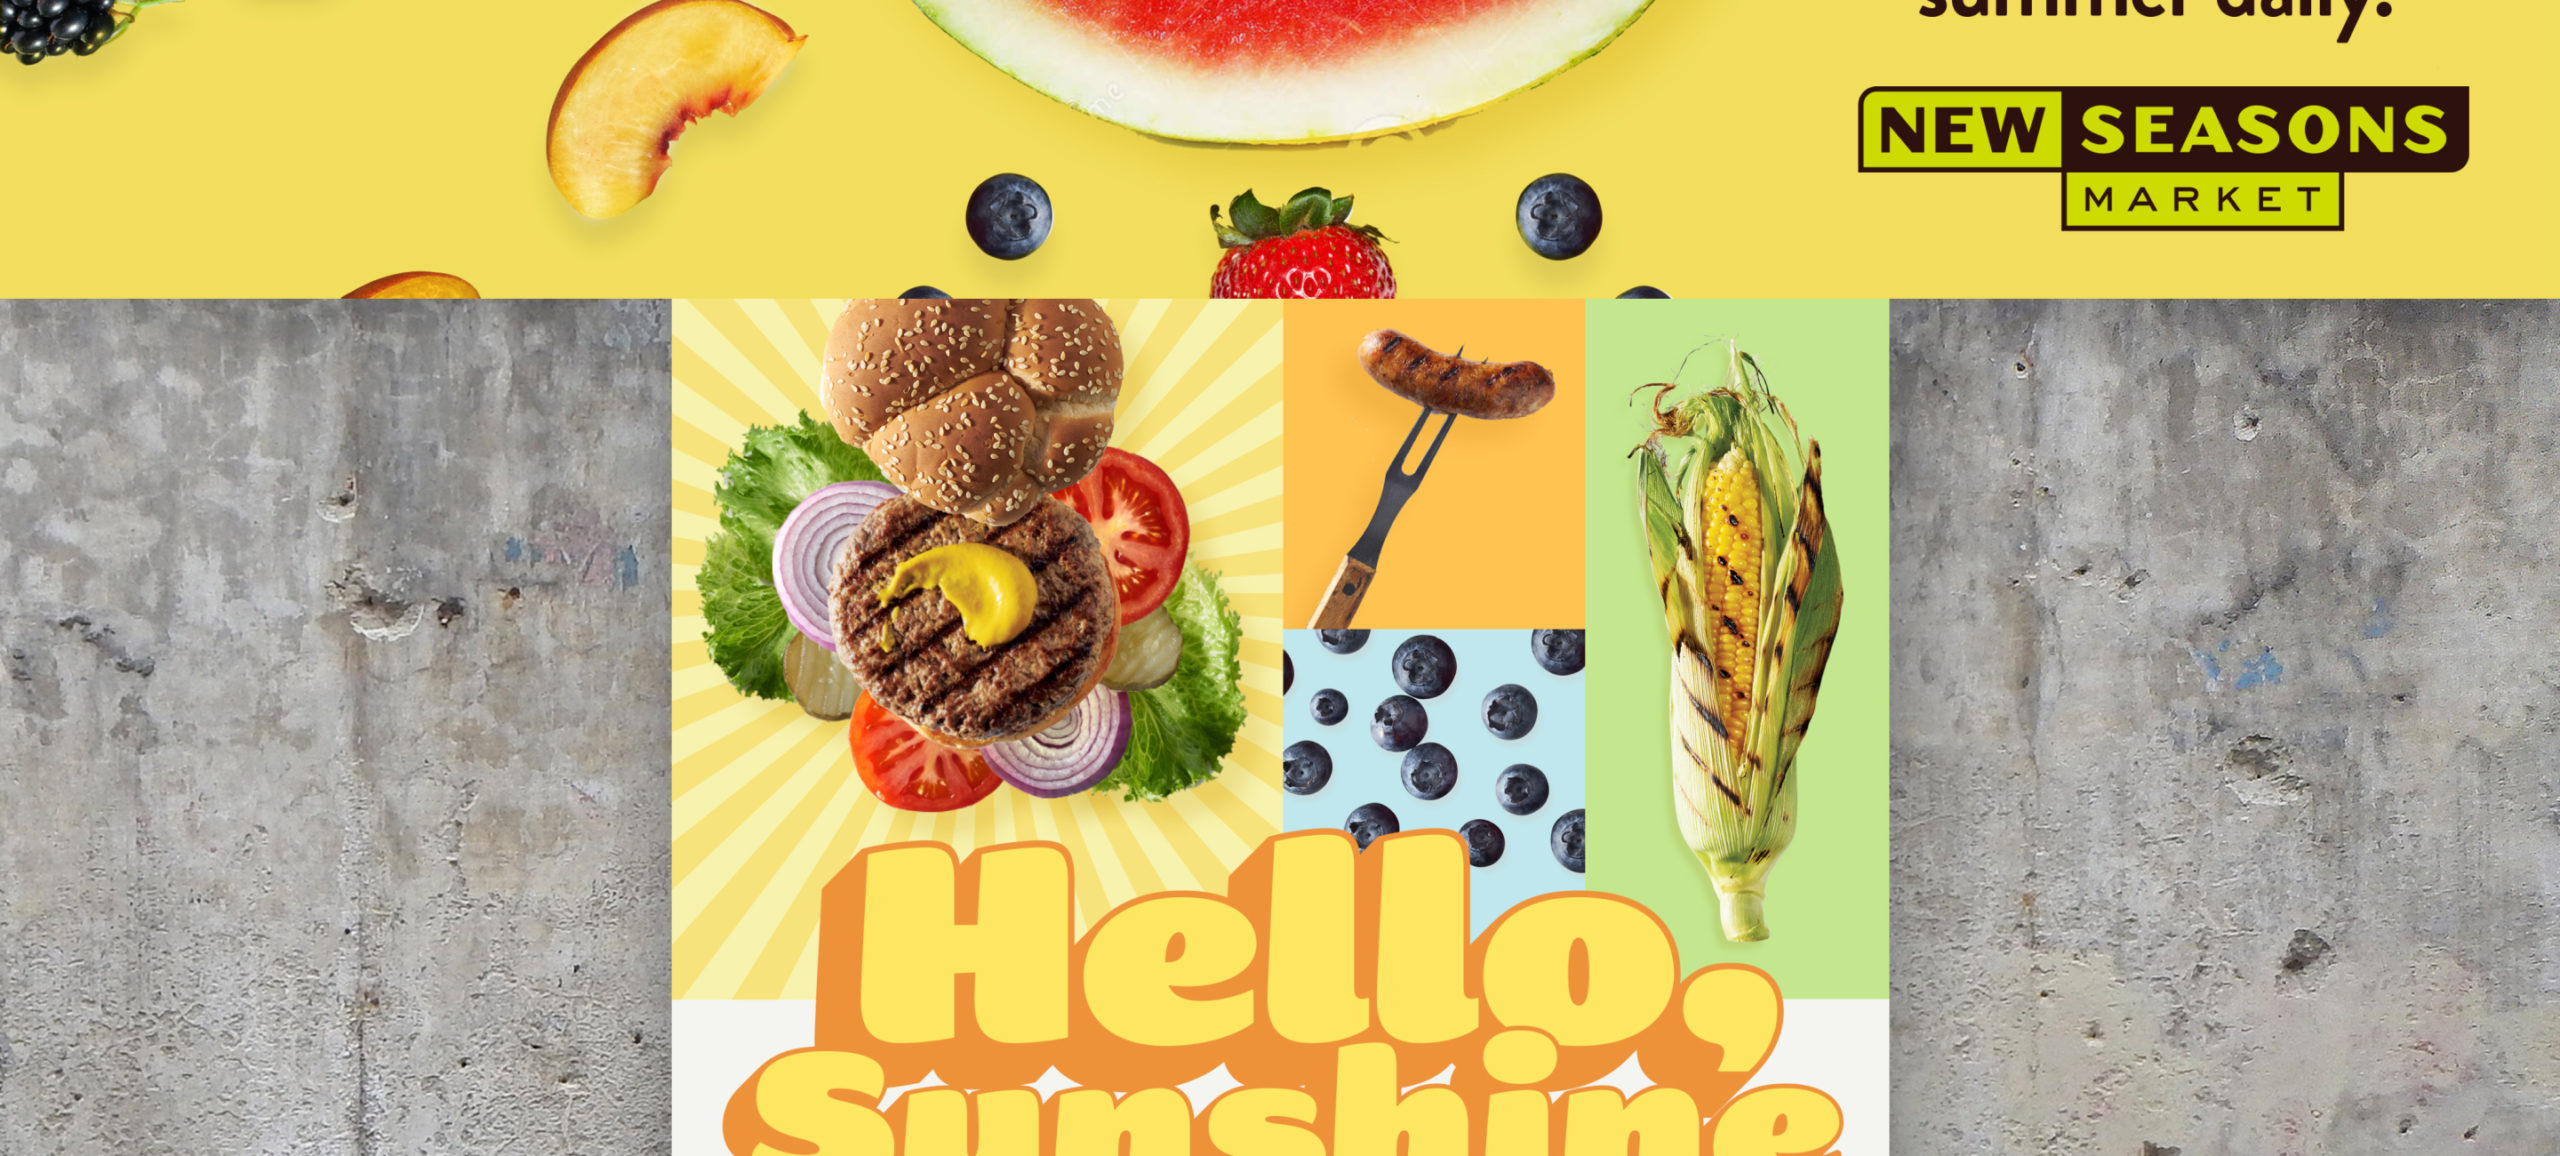 New Seasons billboard graphic of water melon and other grilled food, with campaign tagline 